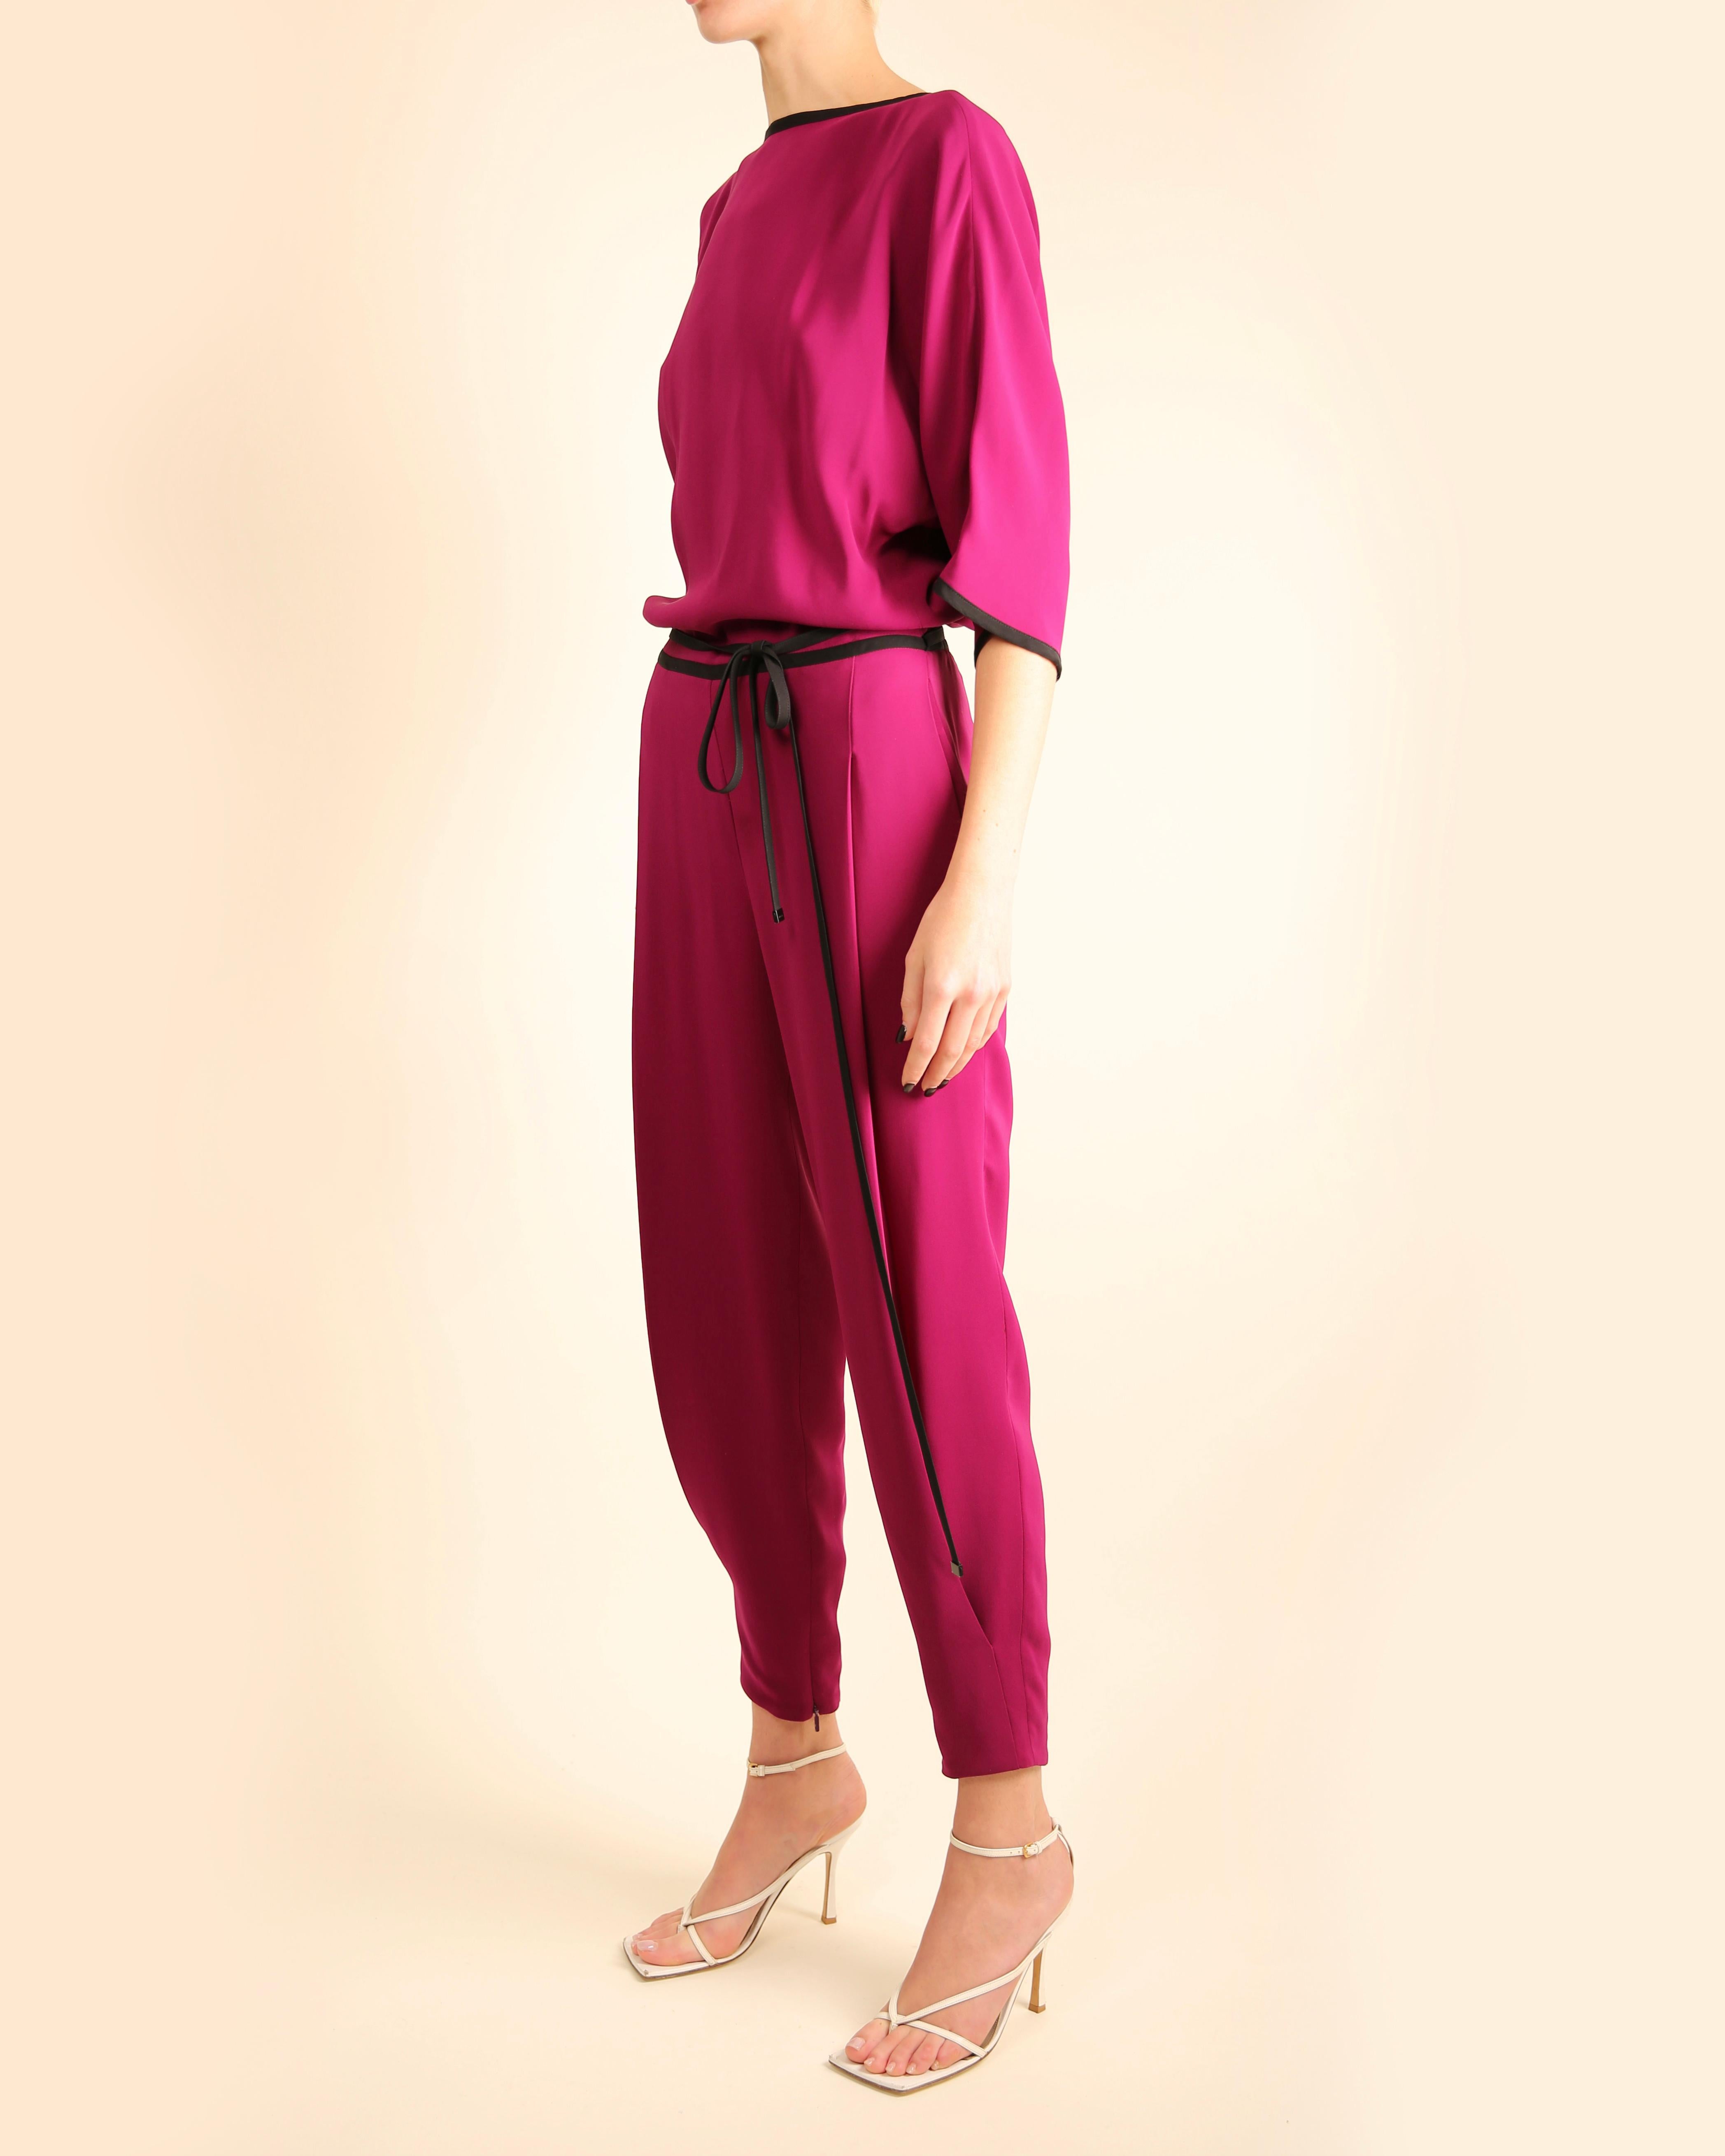 Gucci S/S 2014 silk magenta black backless dolman tapered pant jumpsuit  For Sale 4